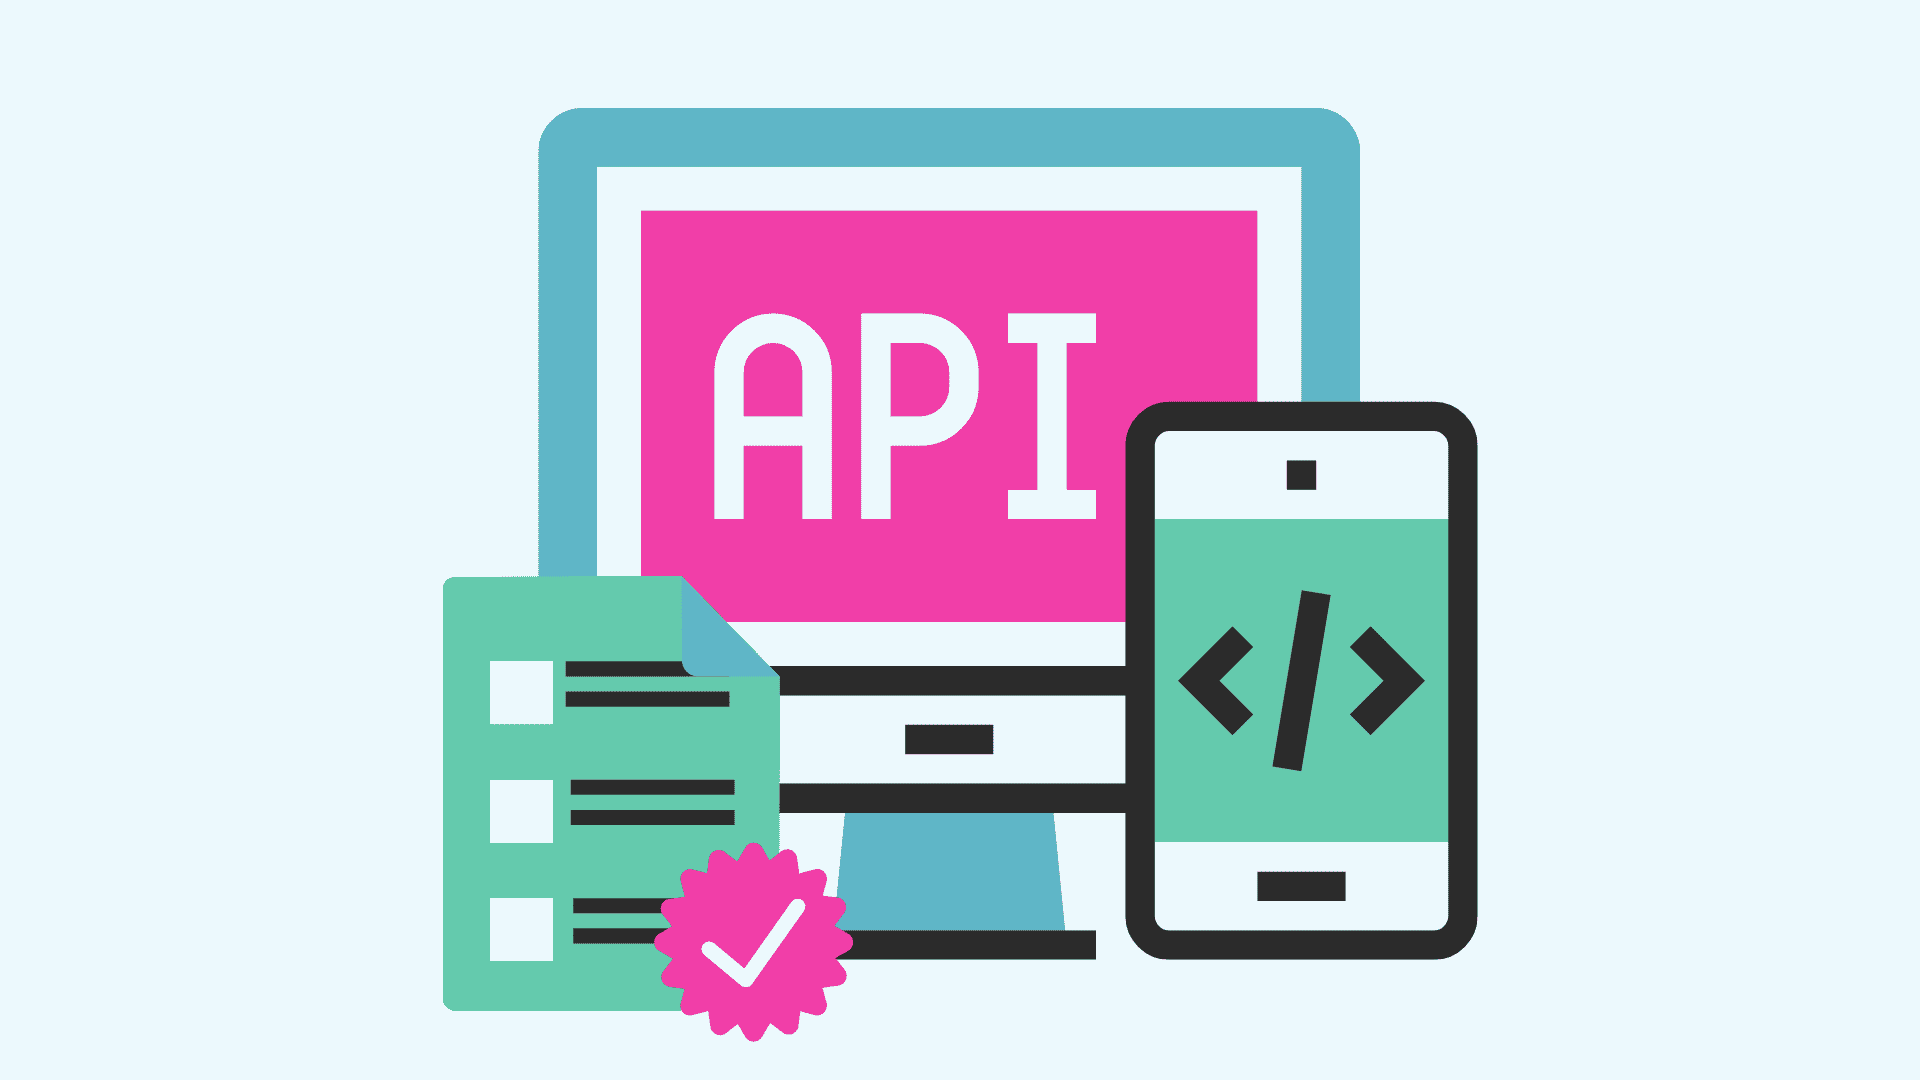 How can we create Documentation for APIs